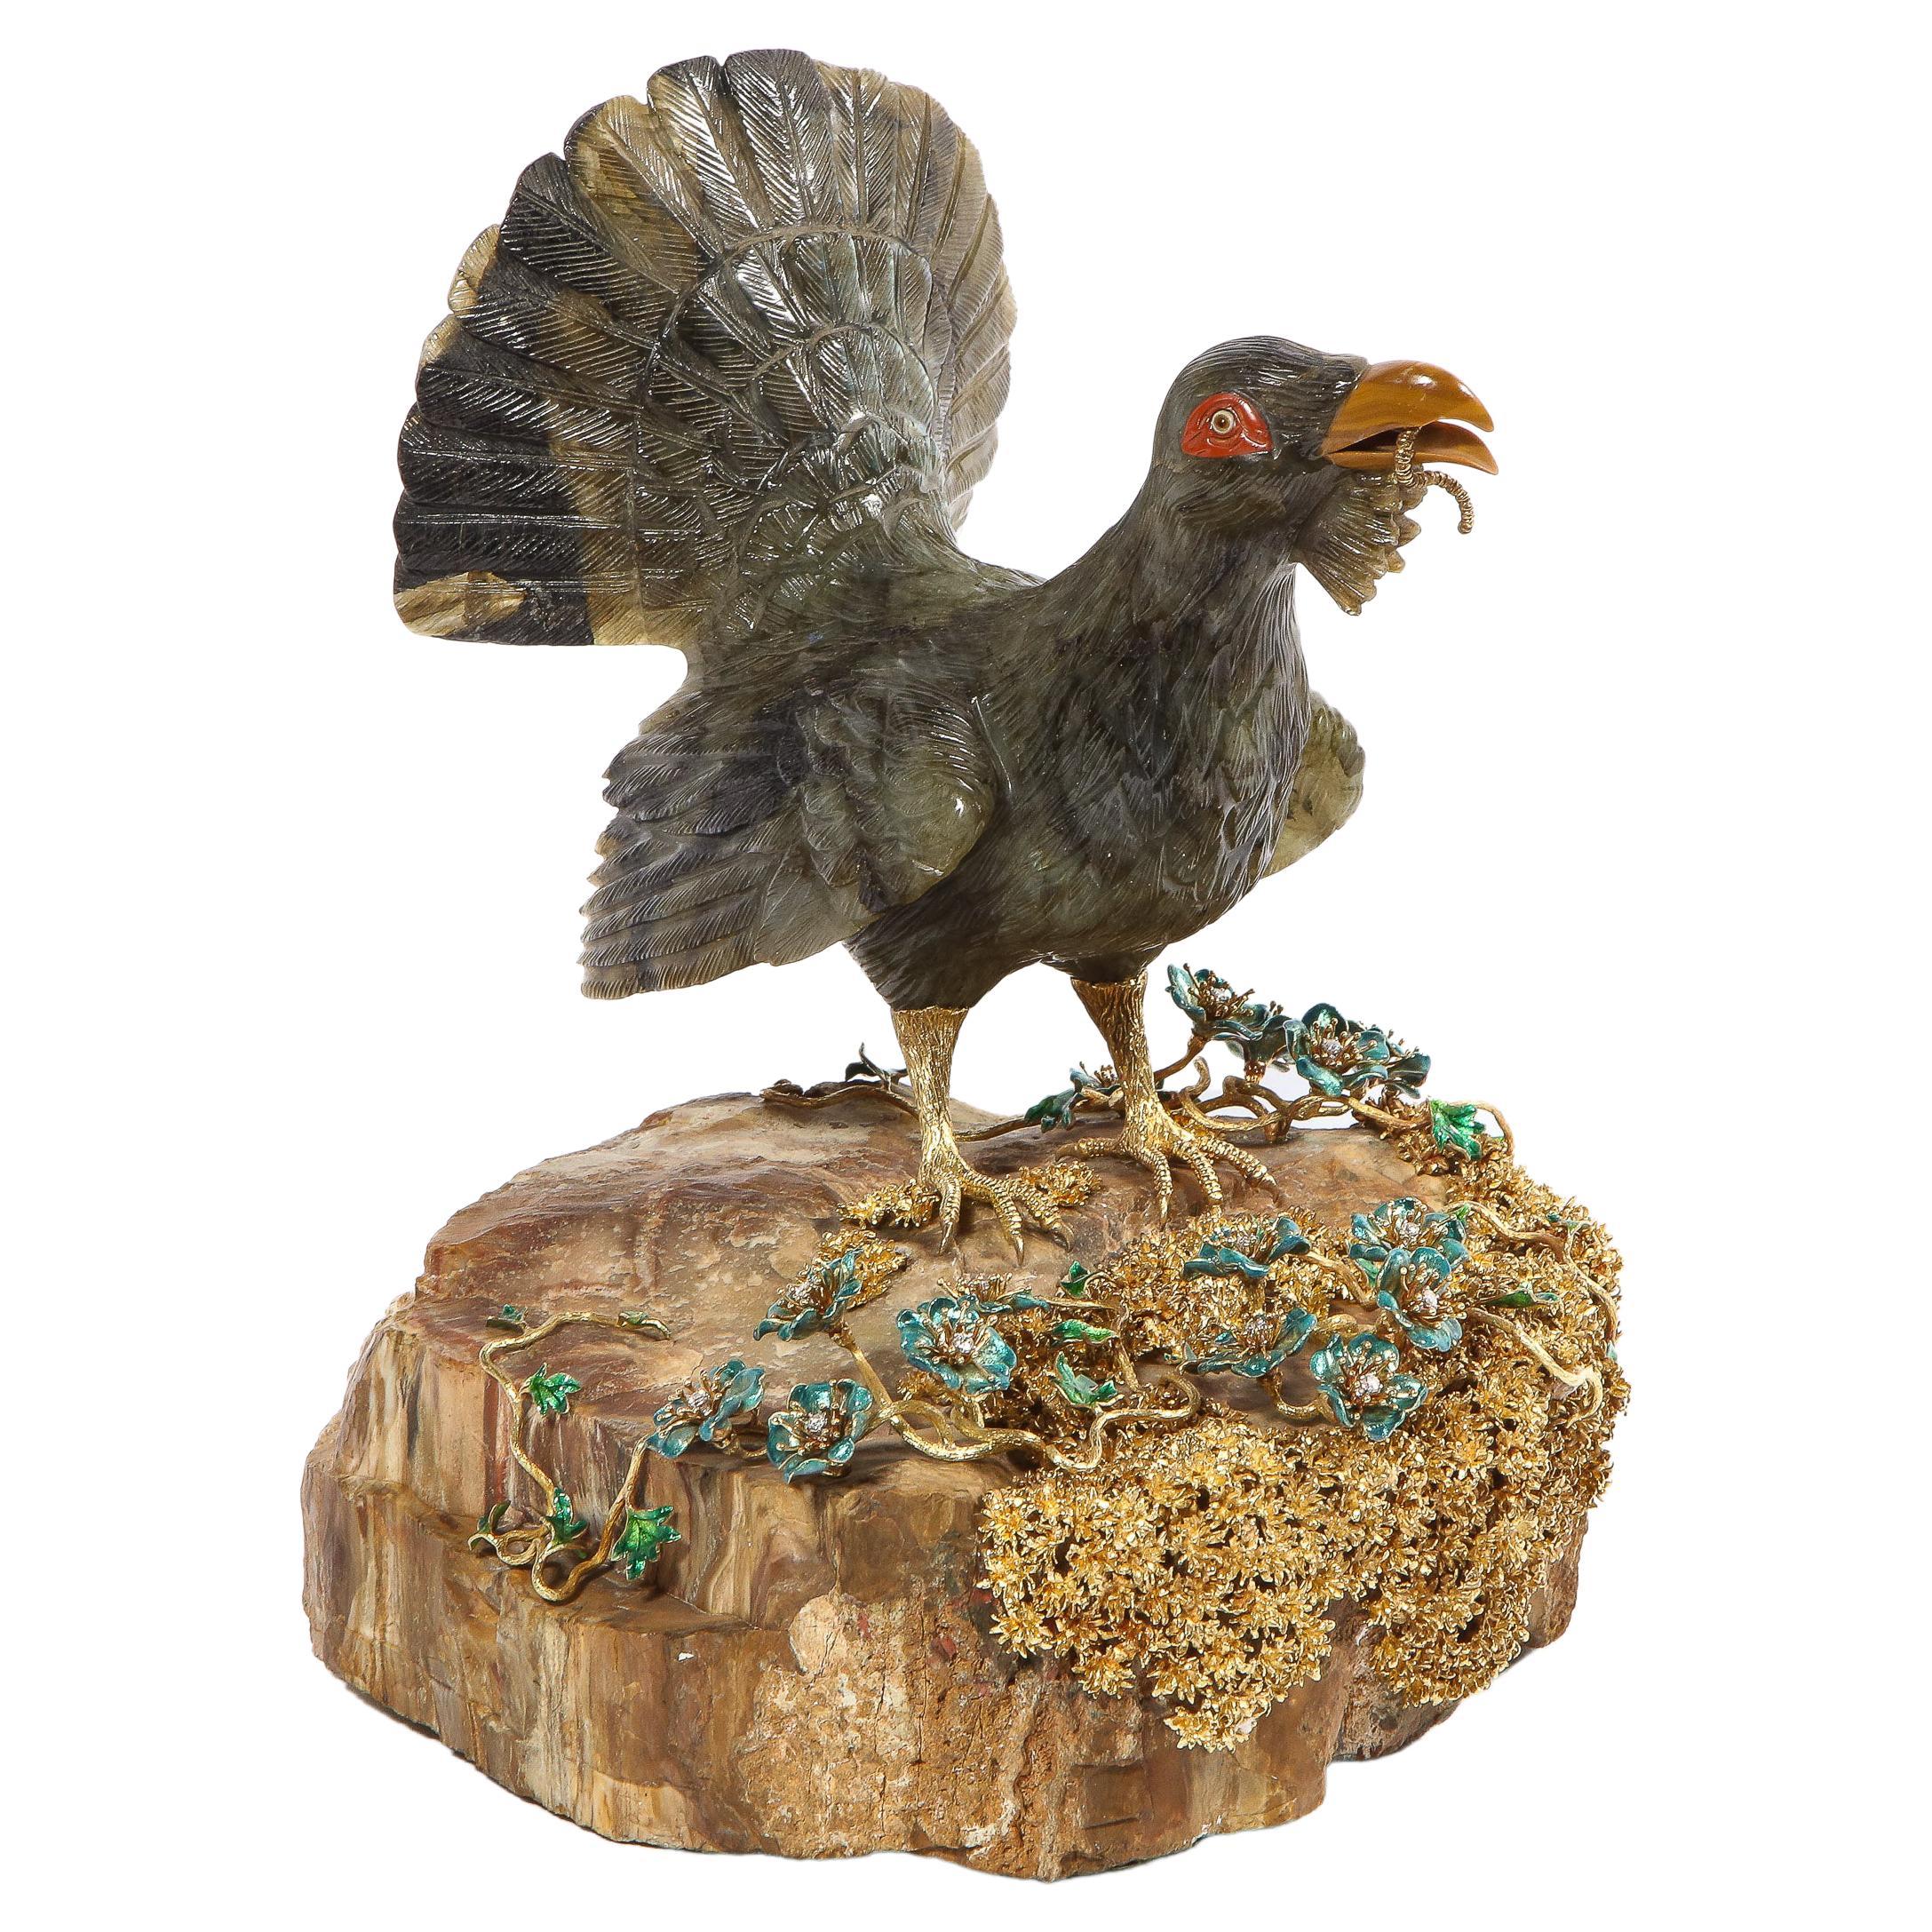 A rare 18K gold, enamel and diamond mounted carved labradorite turkey / Capercaillie bird sculpture on a petrified wood base, attributed to Manfred Wild, Idar-Oberstein, Germany.

Very finely crafted of the highest quality and best color Madagascar